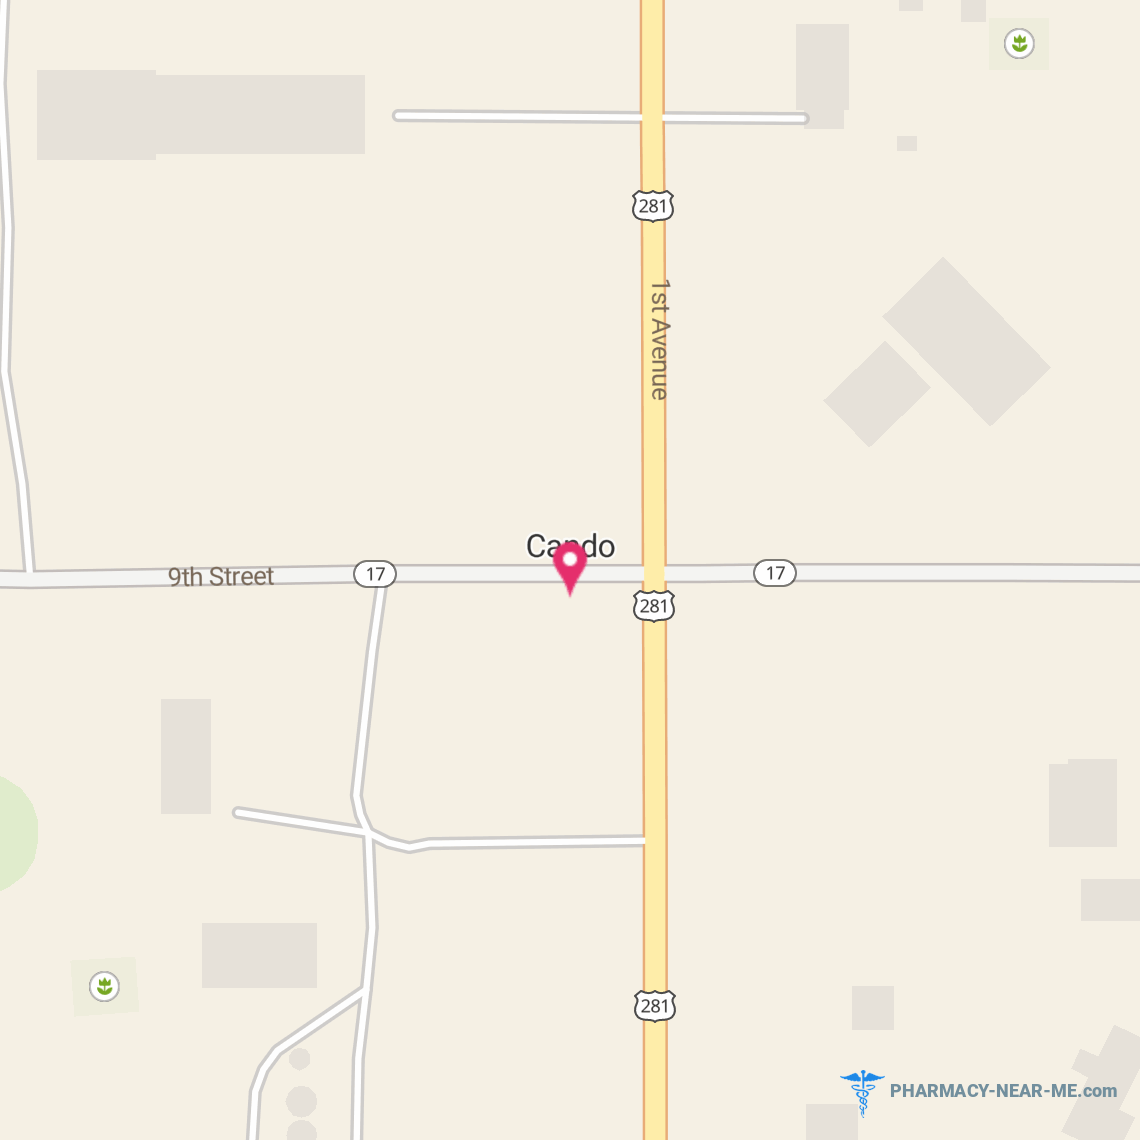 TOWNER COUNTY MEDICAL CENTER - Pharmacy Hours, Phone, Reviews & Information: Cando, North Dakota 58324, United States